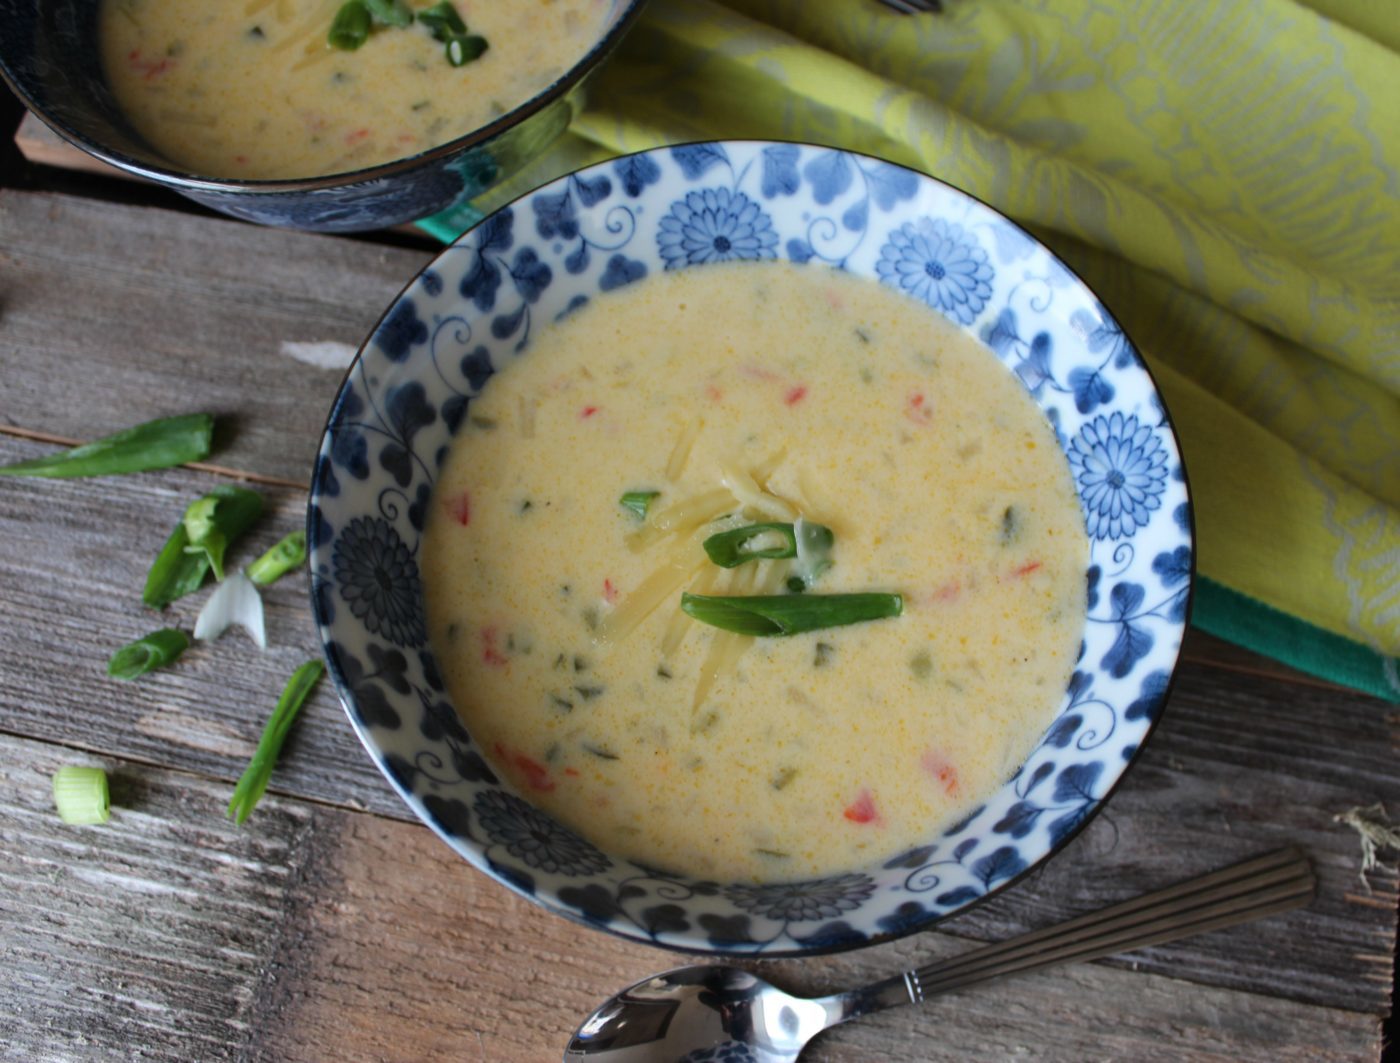 Potatoes in soup or chowder form is always a good idea.